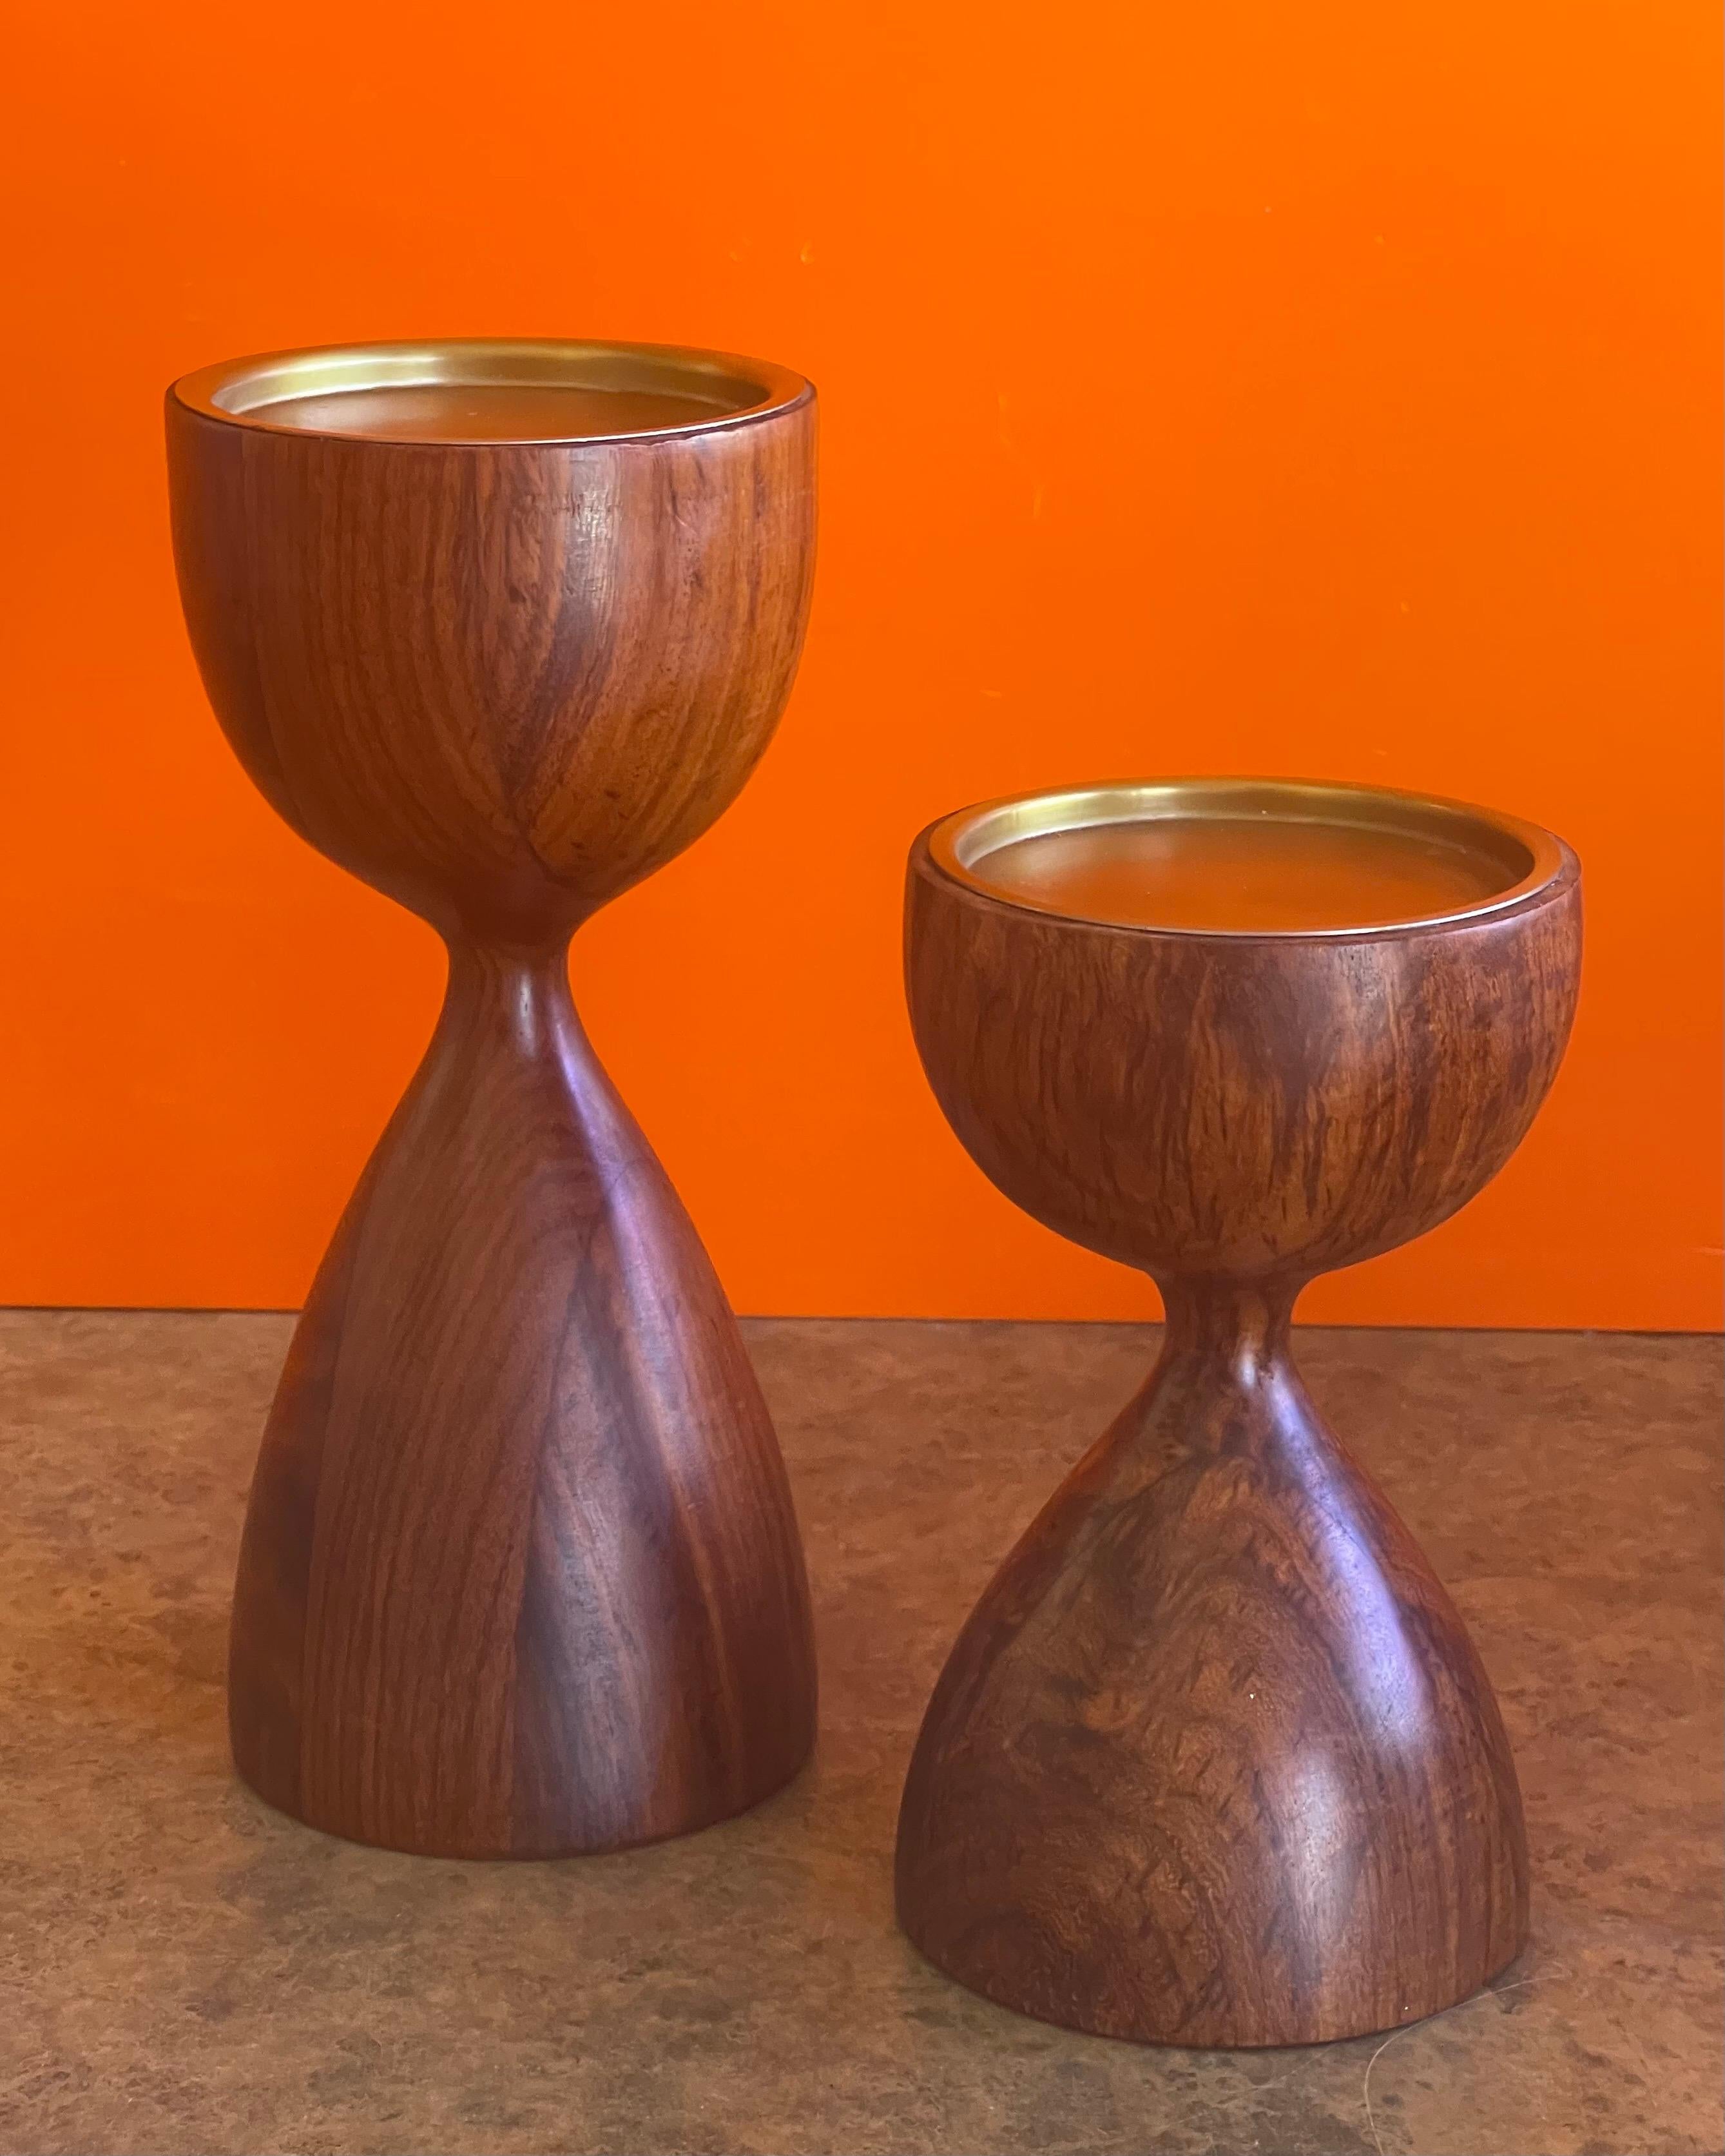 Pair of modernist rosewood candlesticks, circa 1970s. The pair are in very good condition and are capped with a round brass candle liner. The diameter of the holders are 3.75